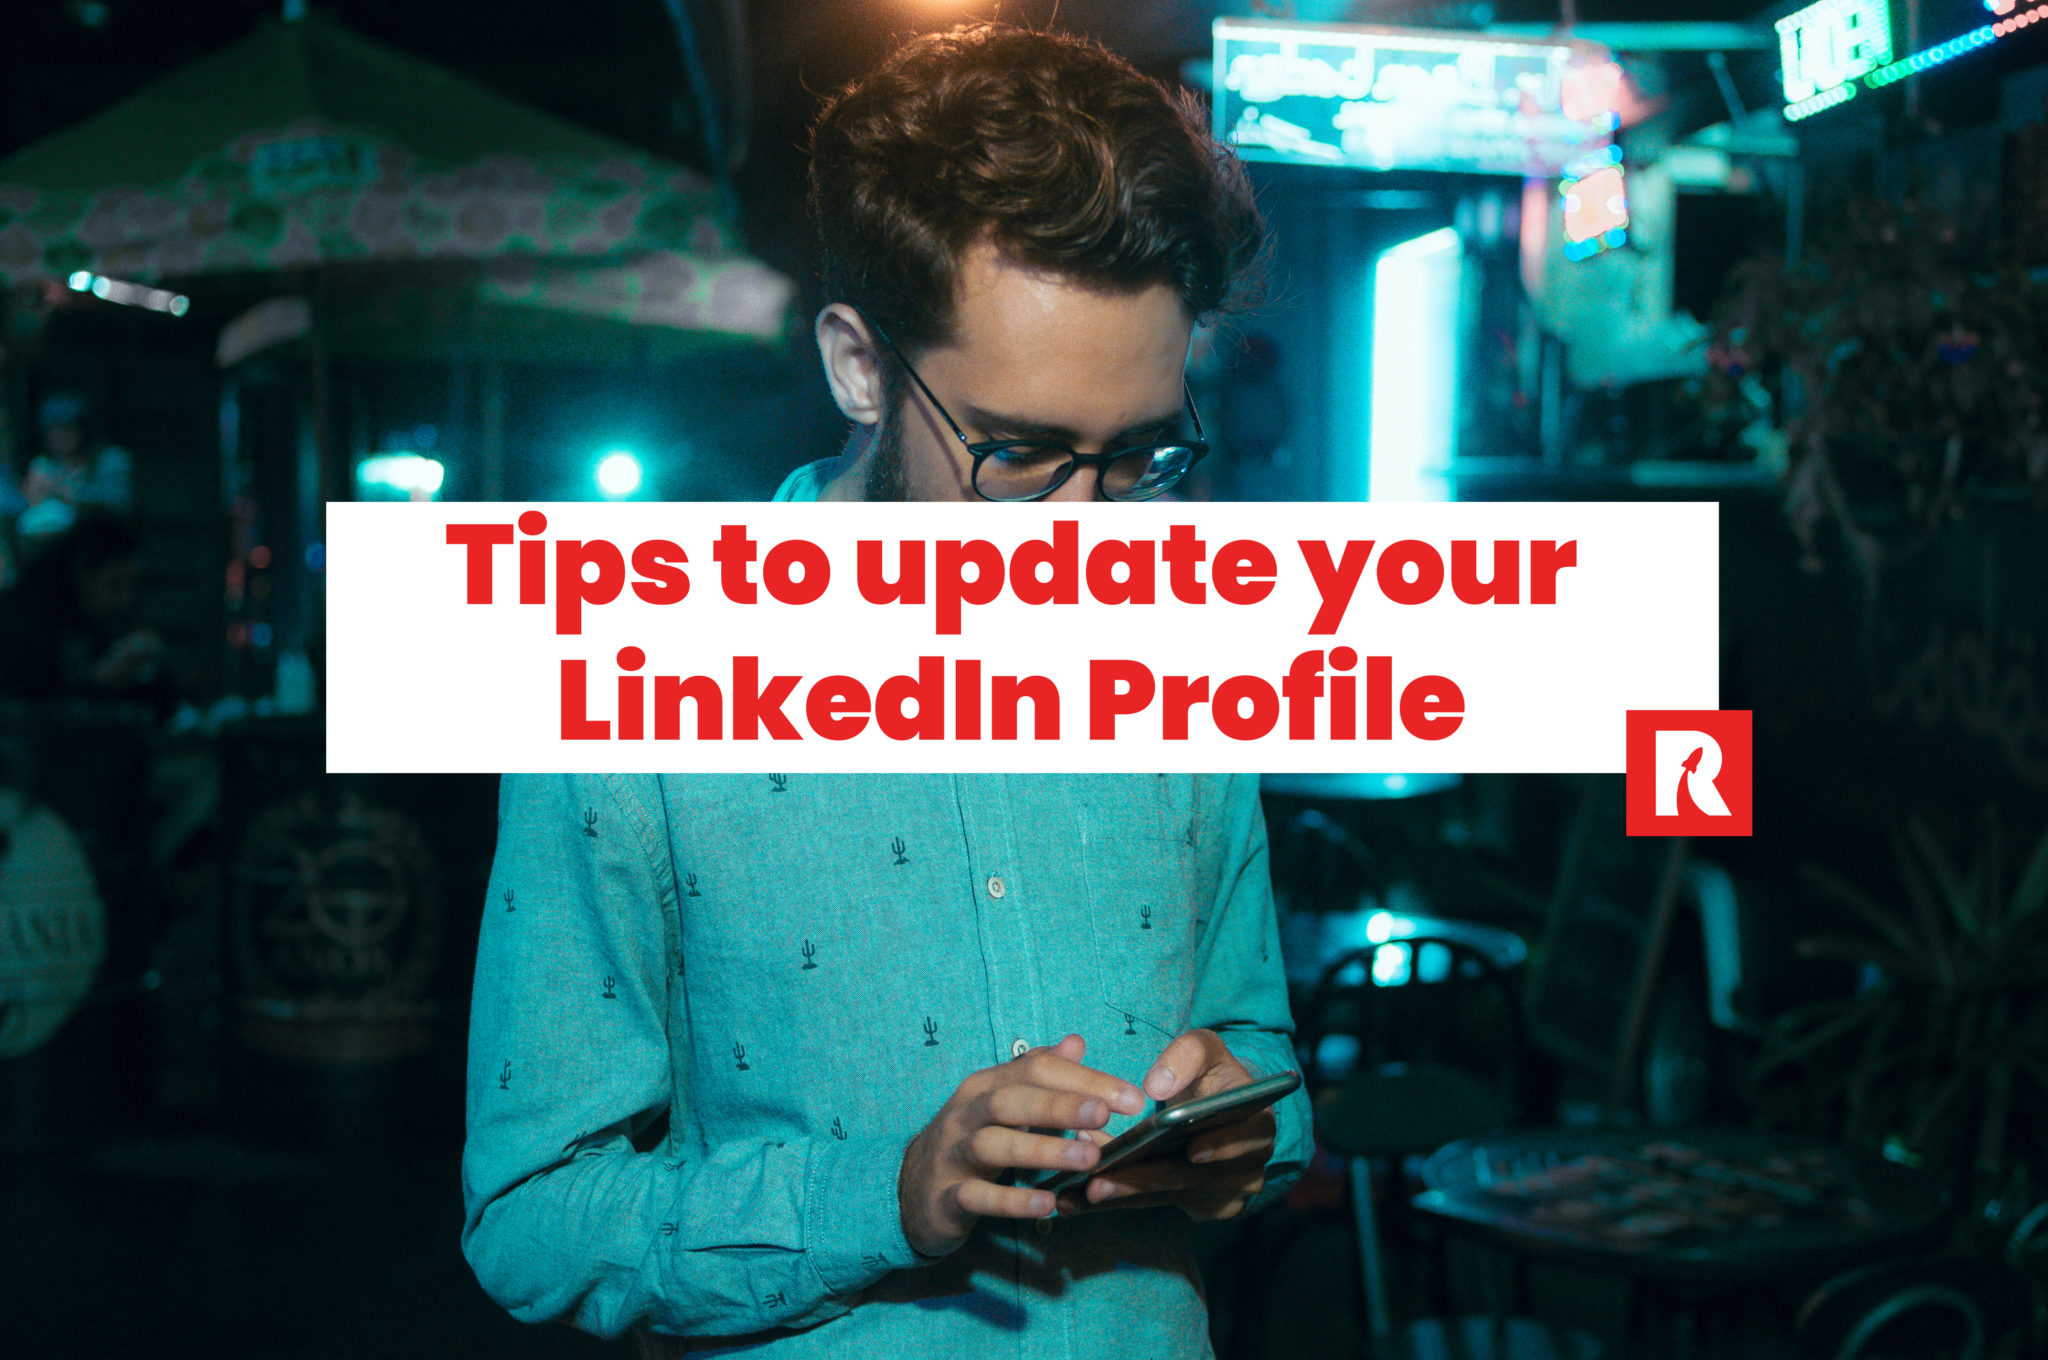 Powerful tips to update your LinkedIn profile